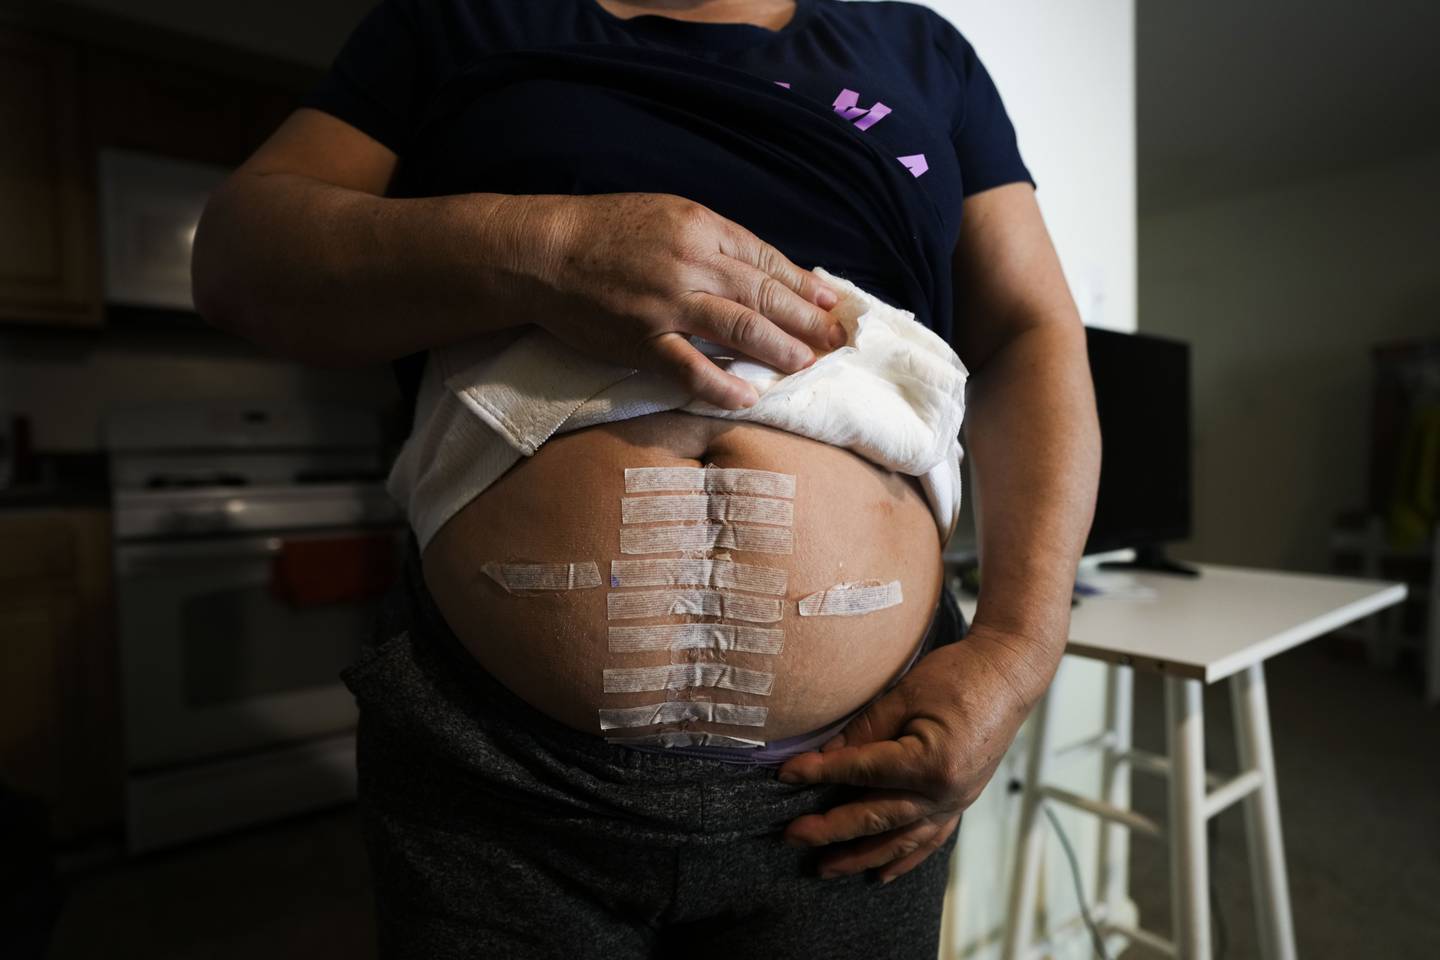 Verónica del Cid Gaitán, an undocumented immigrant, shows her recent incisions from a surgery to remove a tumor in her colon. She has had one recent follow-up appointment with another scheduled in June and has no insurance to cover them. She is pictured here in her home on April 14, 2023.